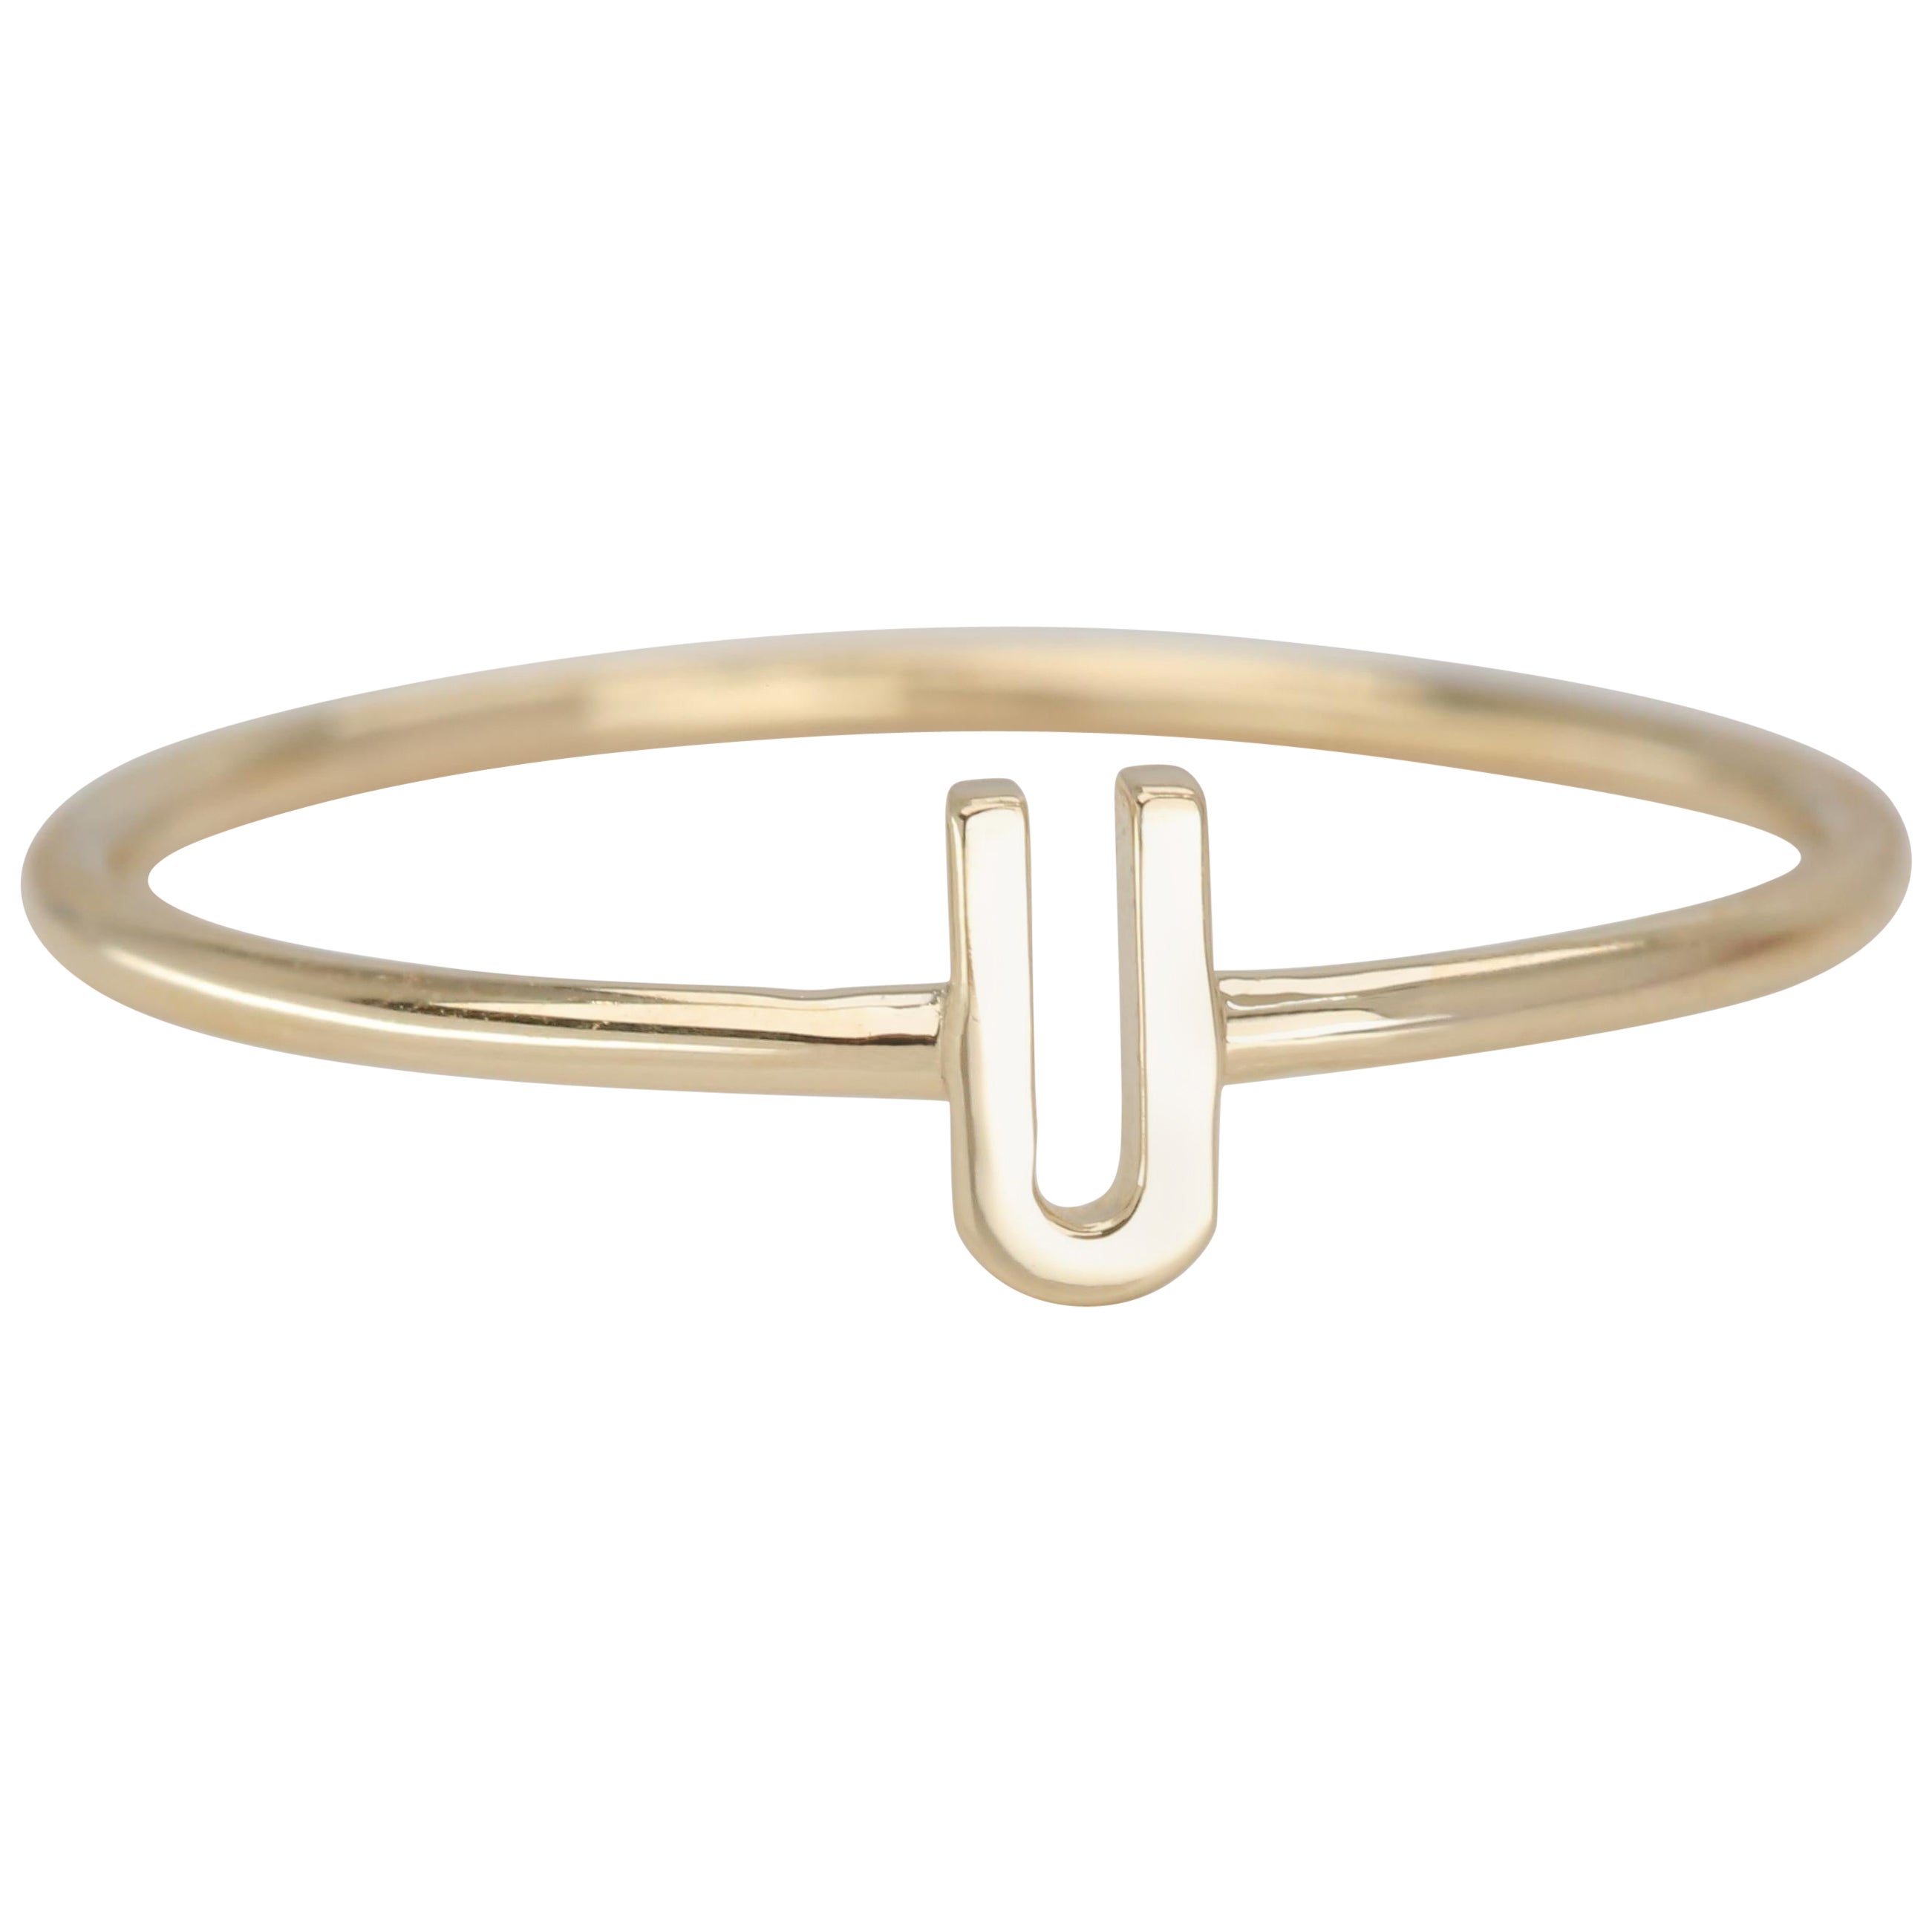 For Sale:  14K Gold Initial U Letter Ring, Personalized Initial Letter Ring